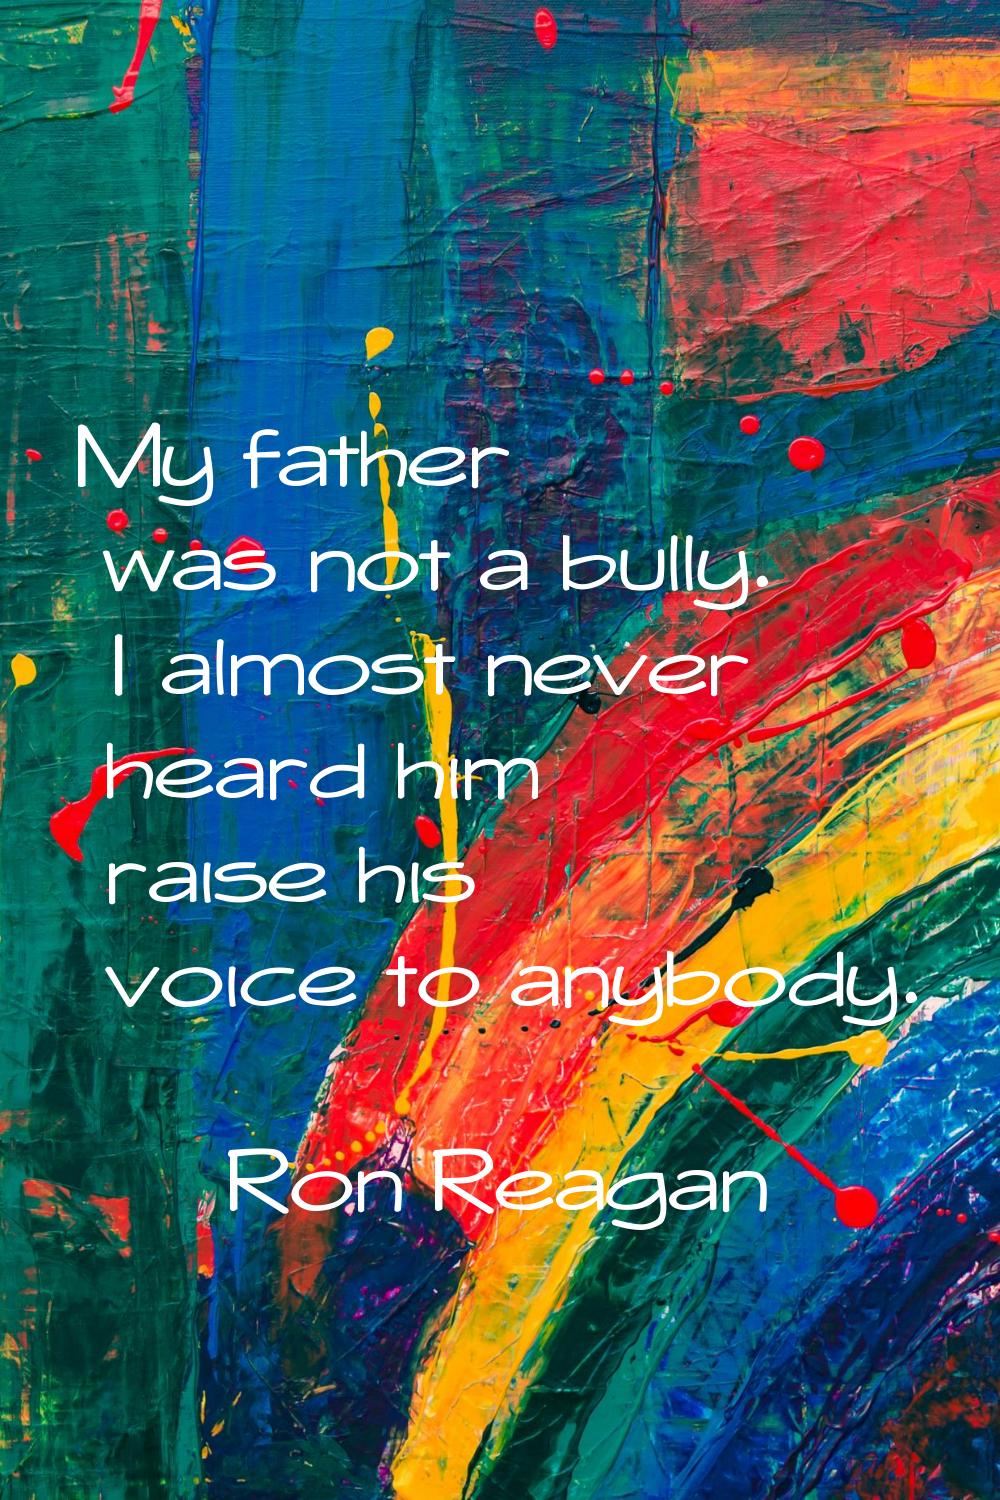 My father was not a bully. I almost never heard him raise his voice to anybody.